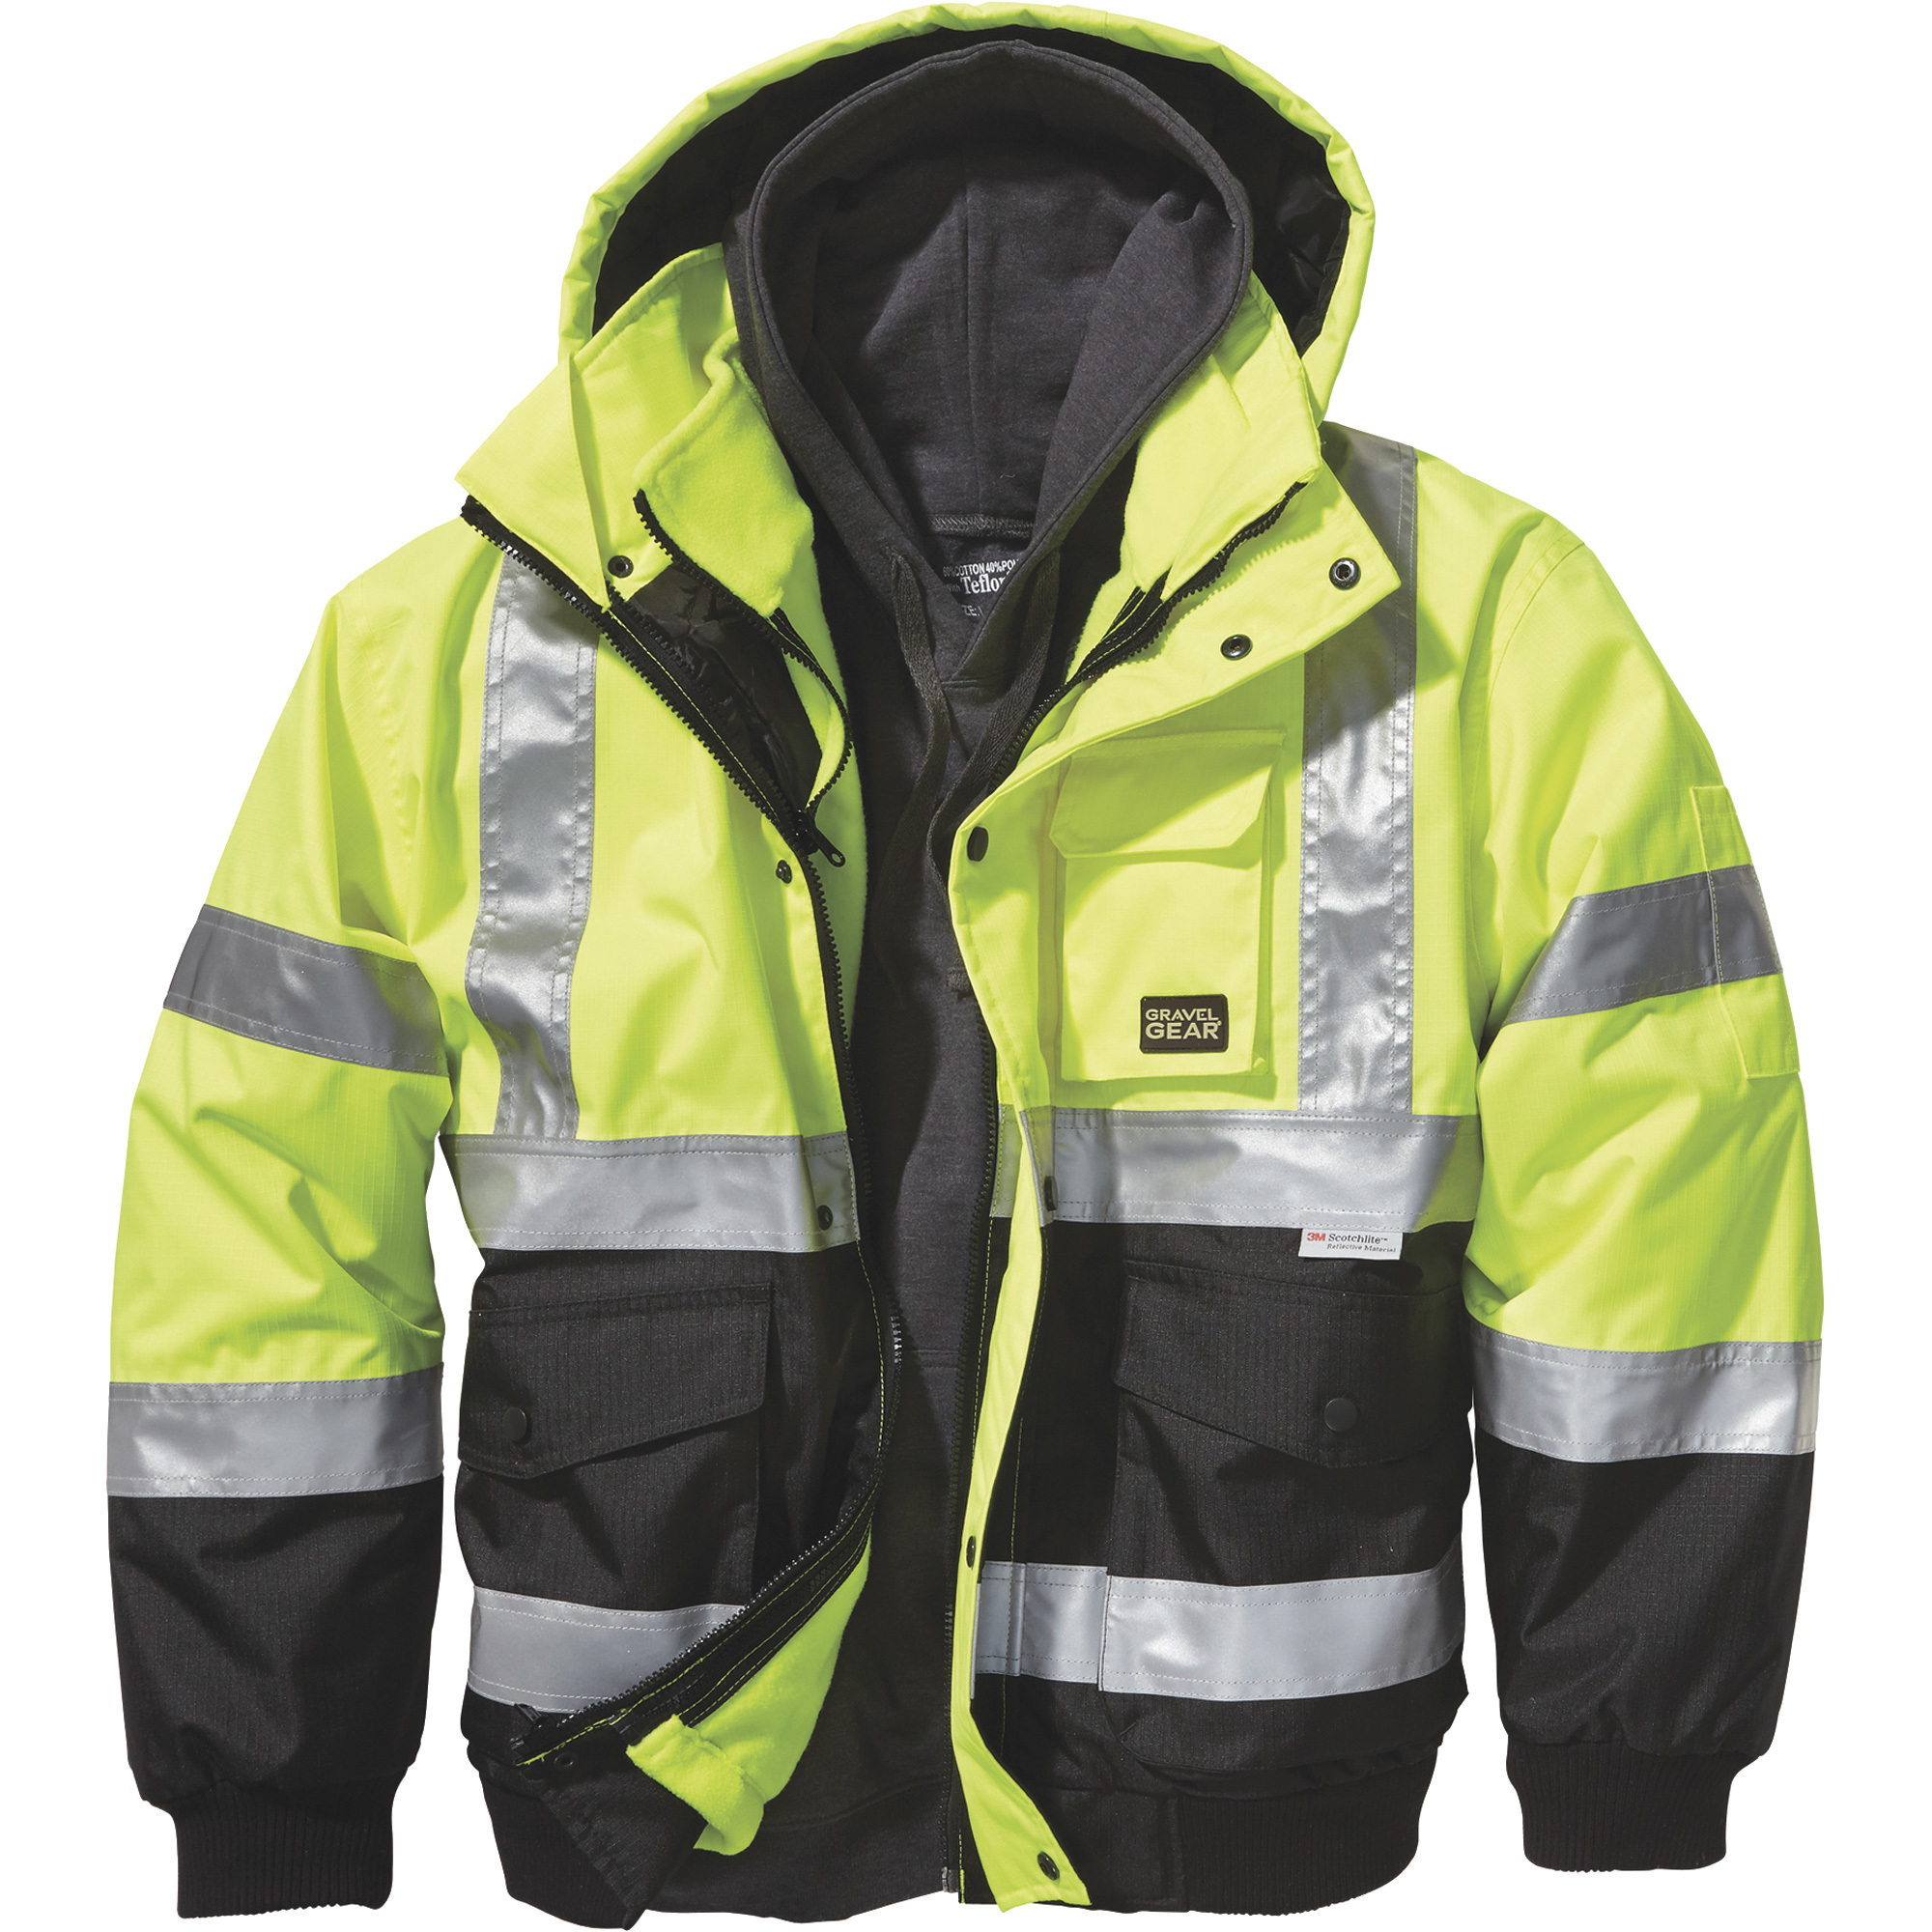 Gravel Gear Men's Class 3 High Visibility 3-in-1 Bomber Jacket with Reflective Material â Lime, 3XL